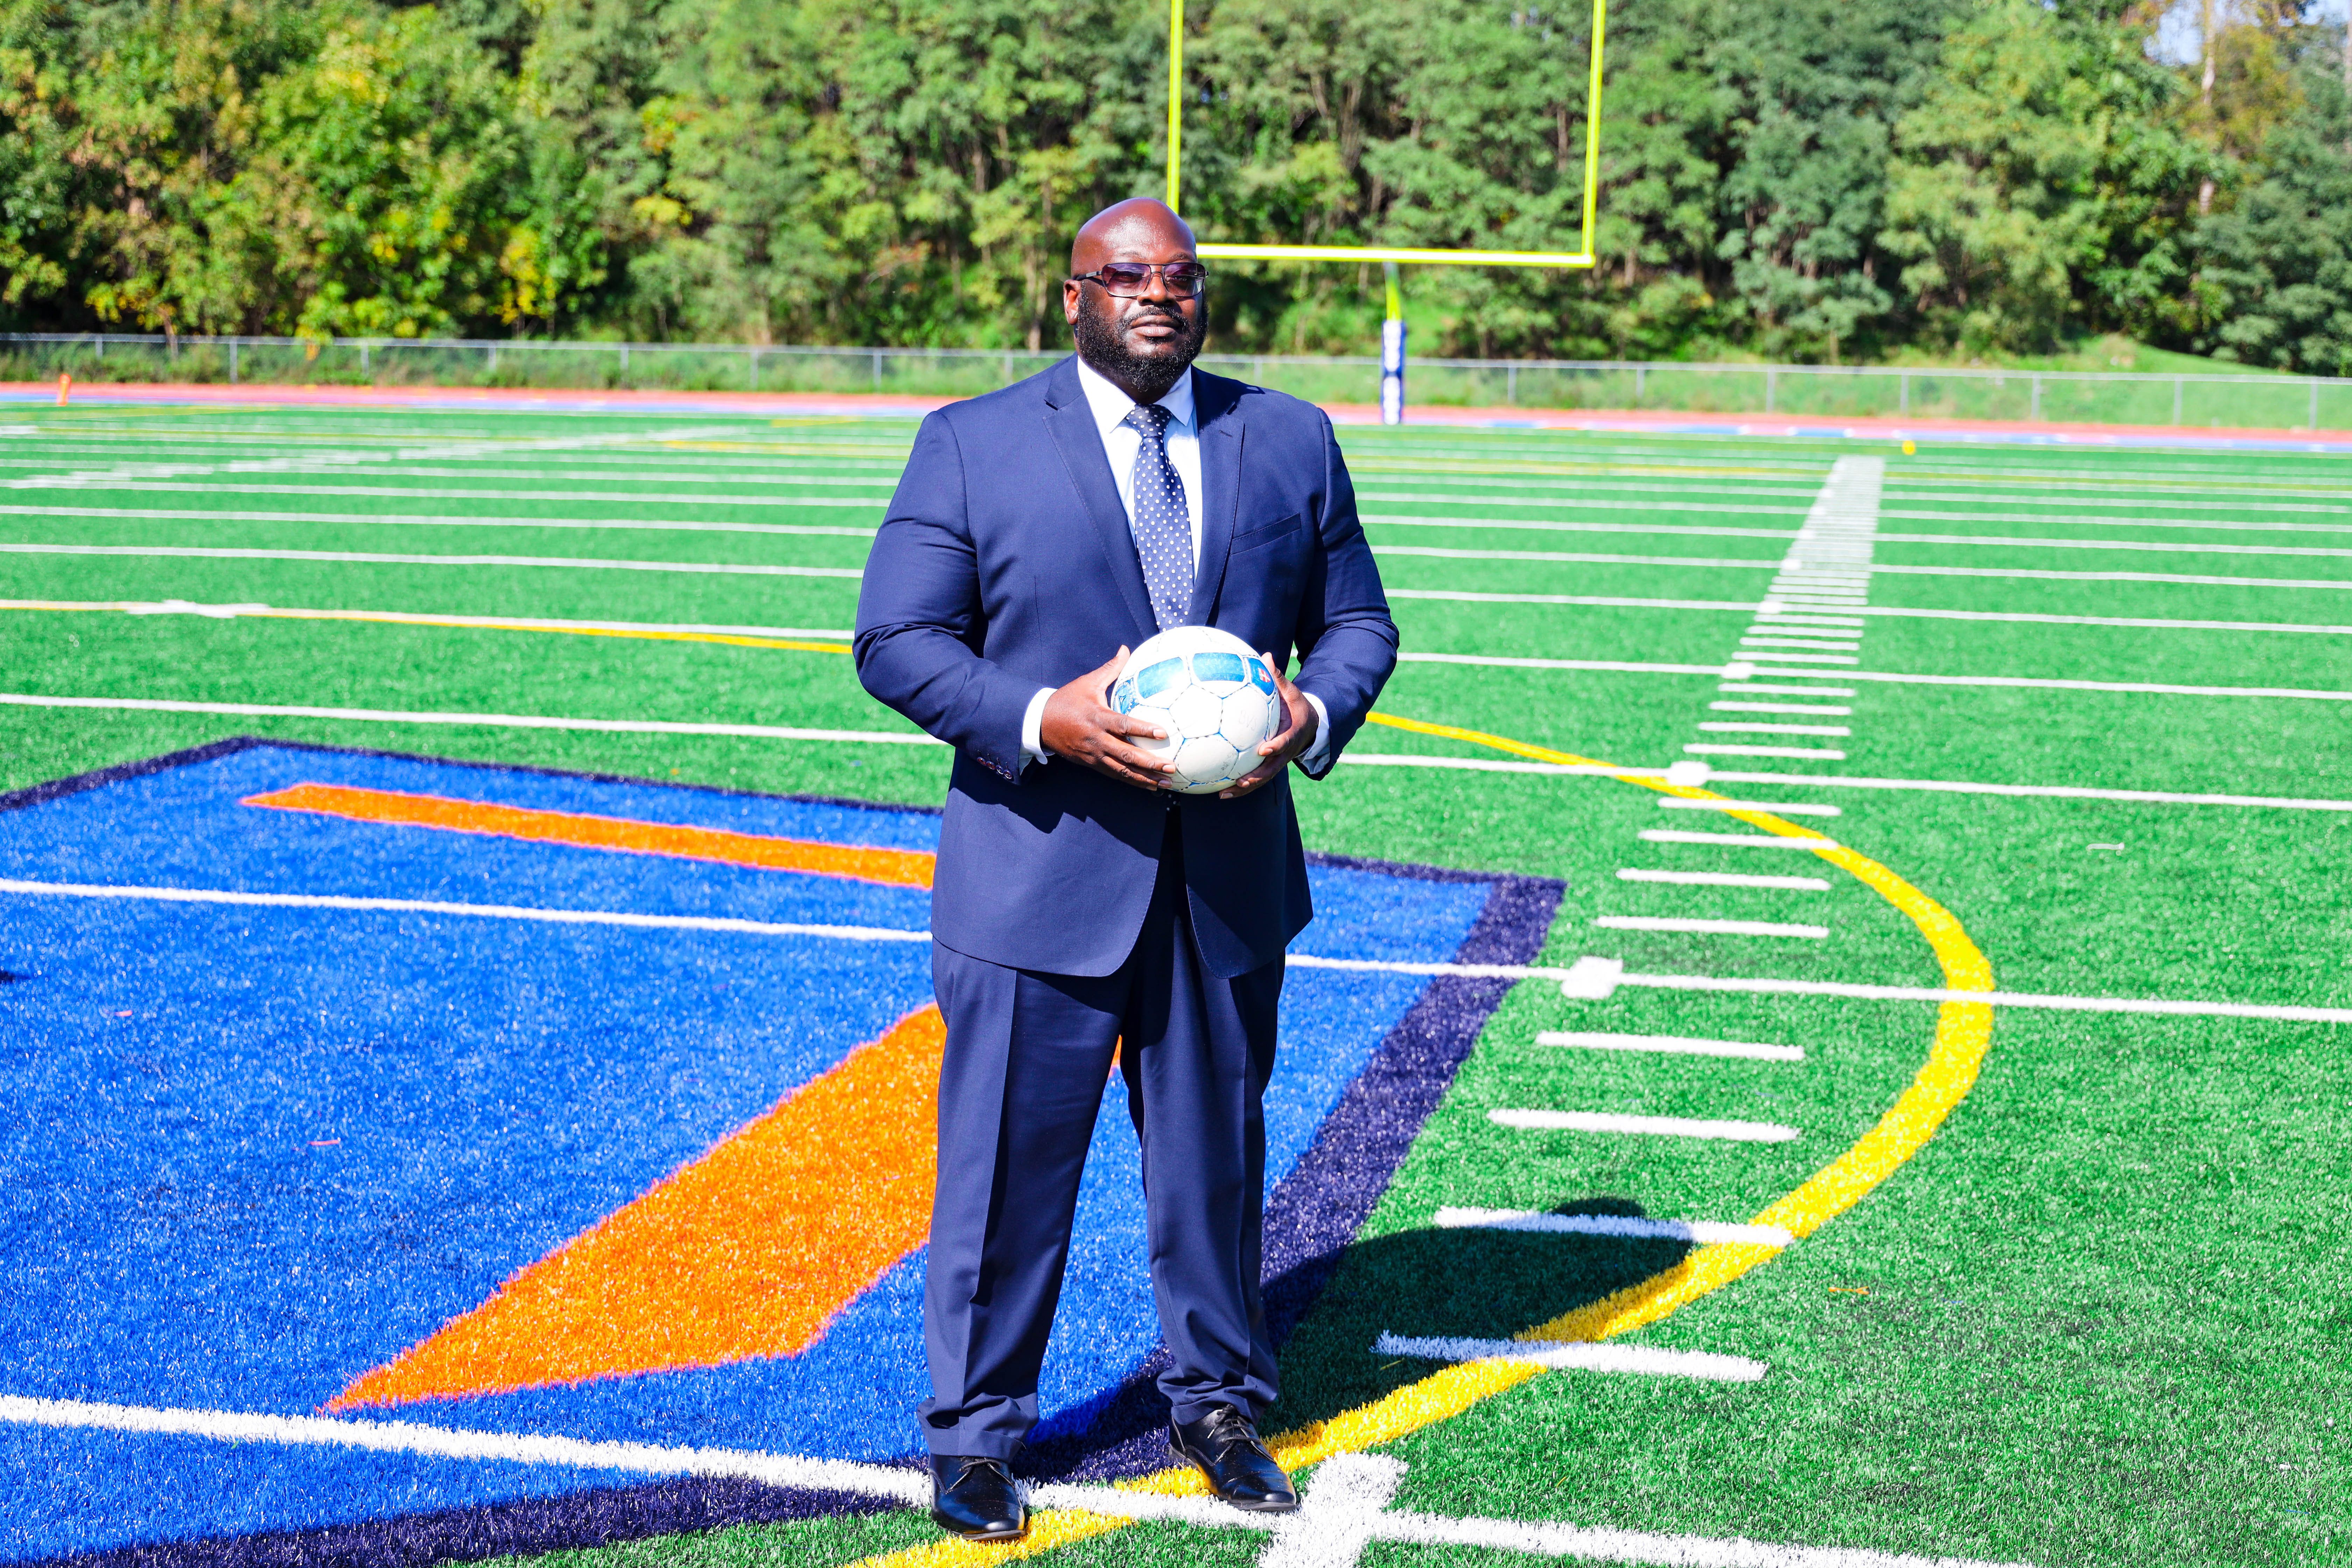 Dr. Cook holding soccer ball on turf field